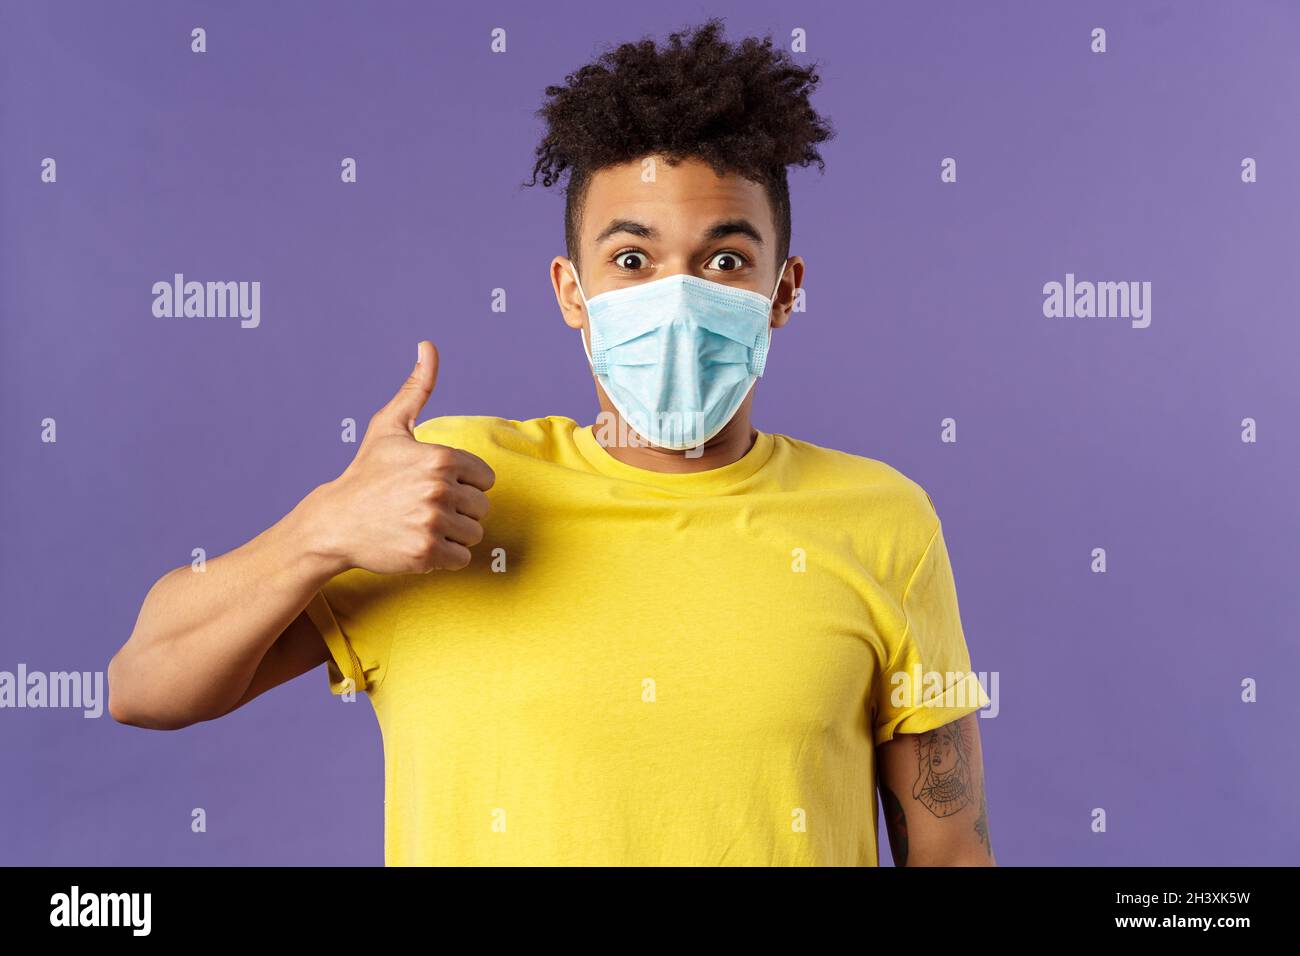 Covid19, healtcare and medicine concept. Excited young hispanic man in facial mask taking care of health, avoid public places, s Stock Photo